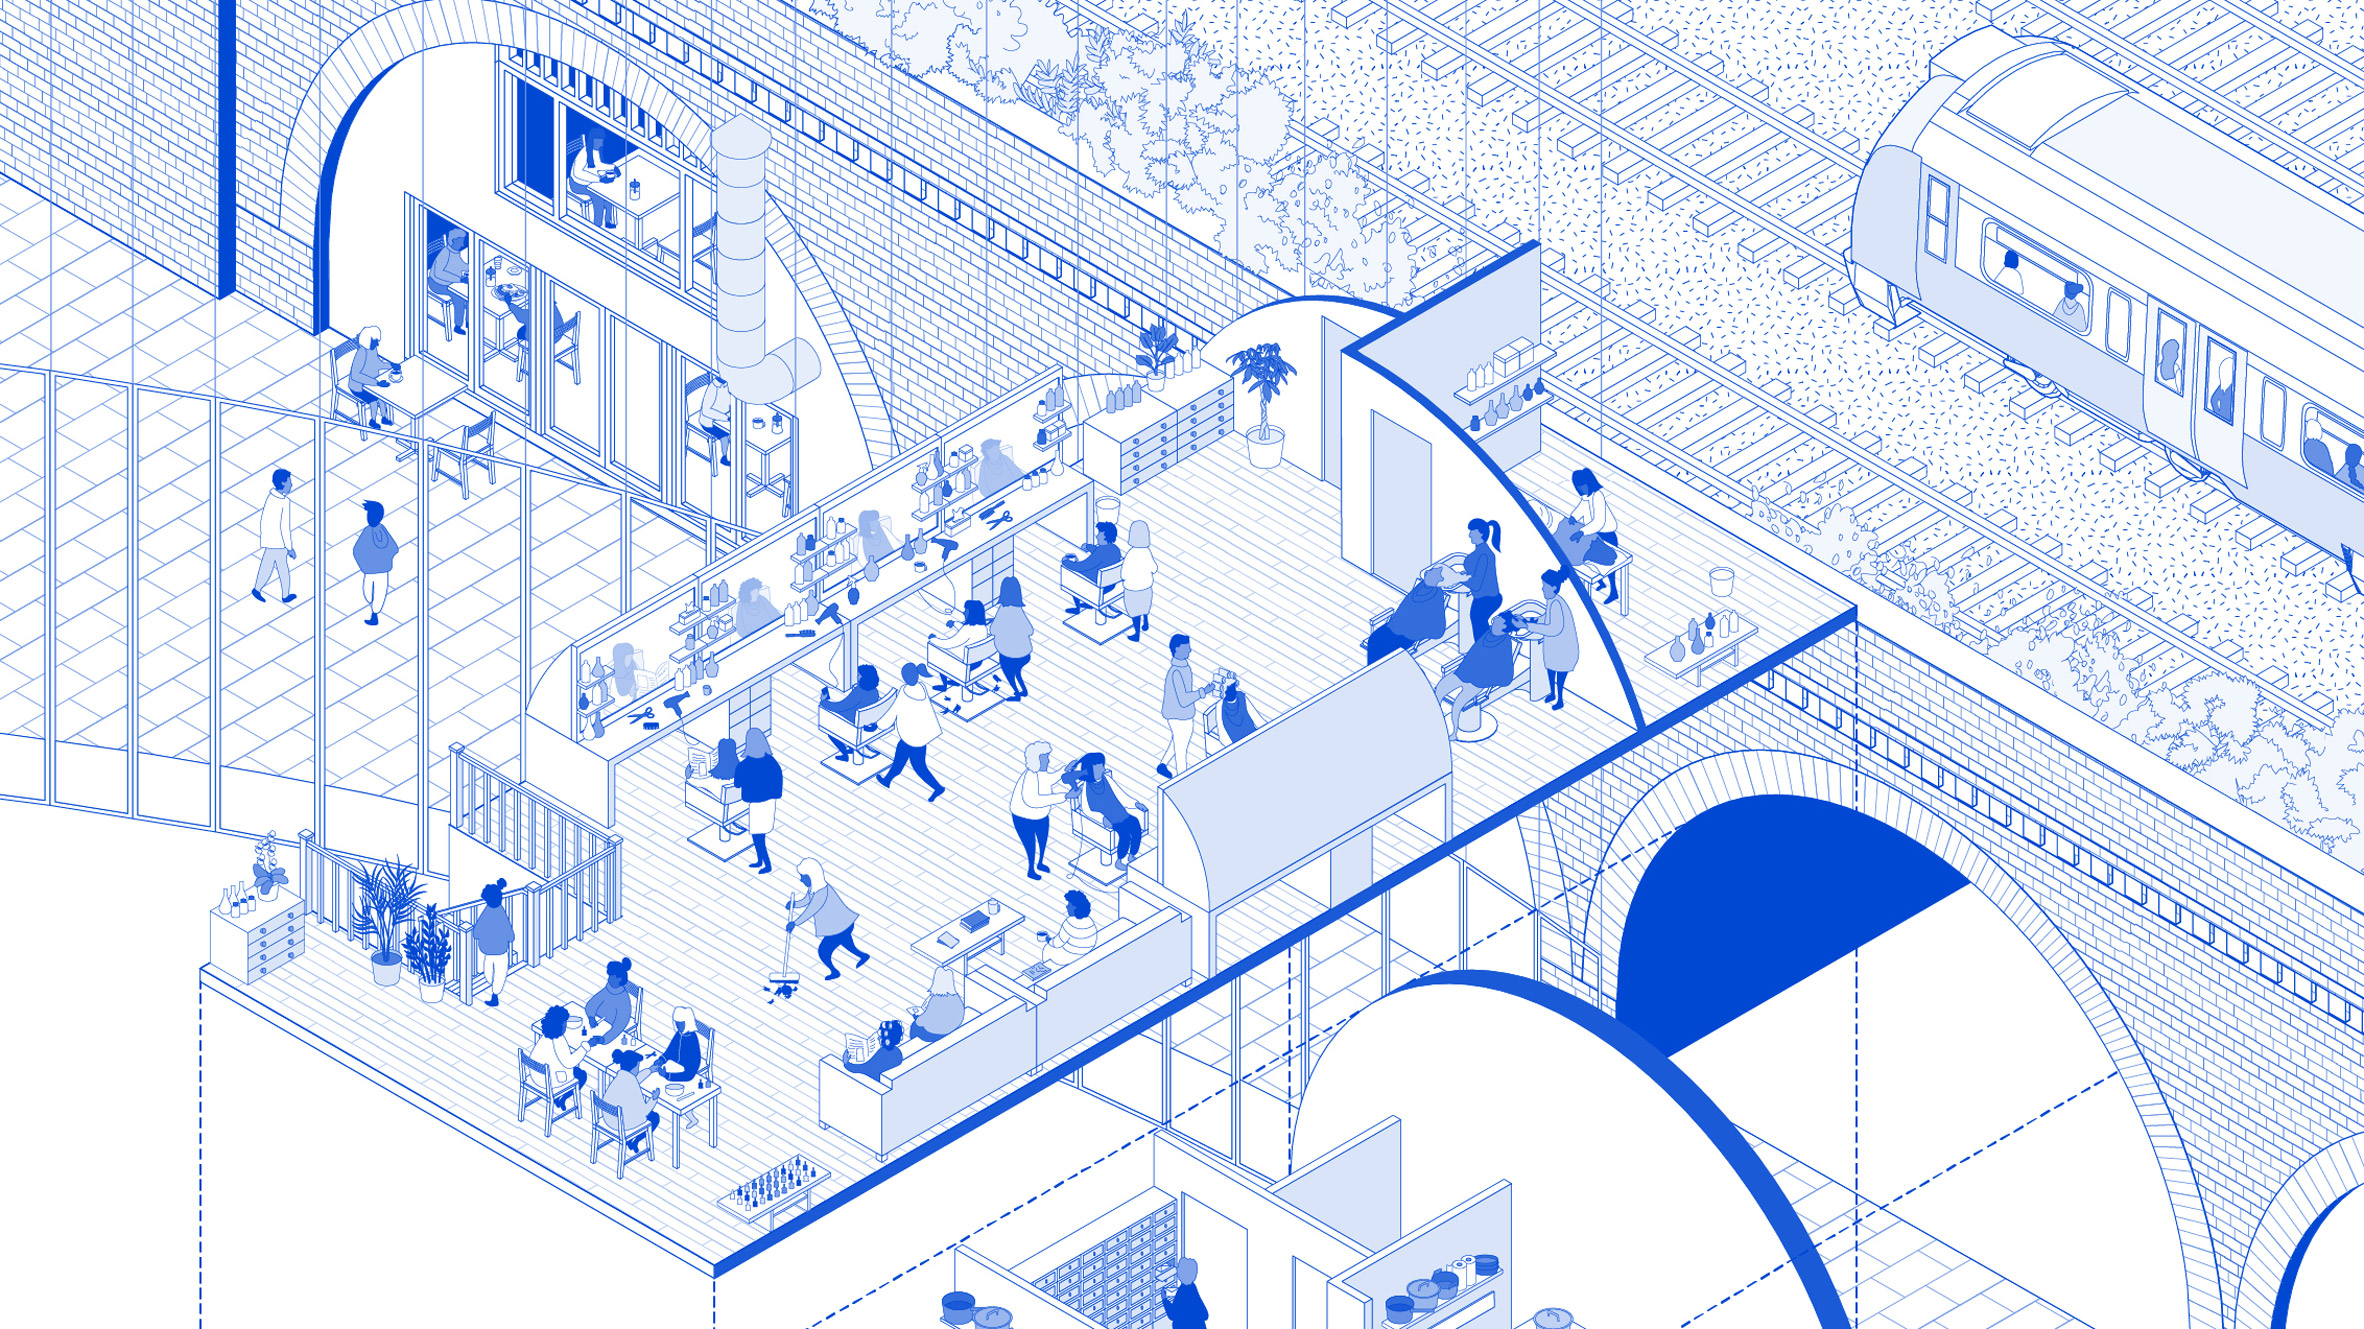 Blue and white isometric drawing of a cultural space under arches by Theatrum Mundi student